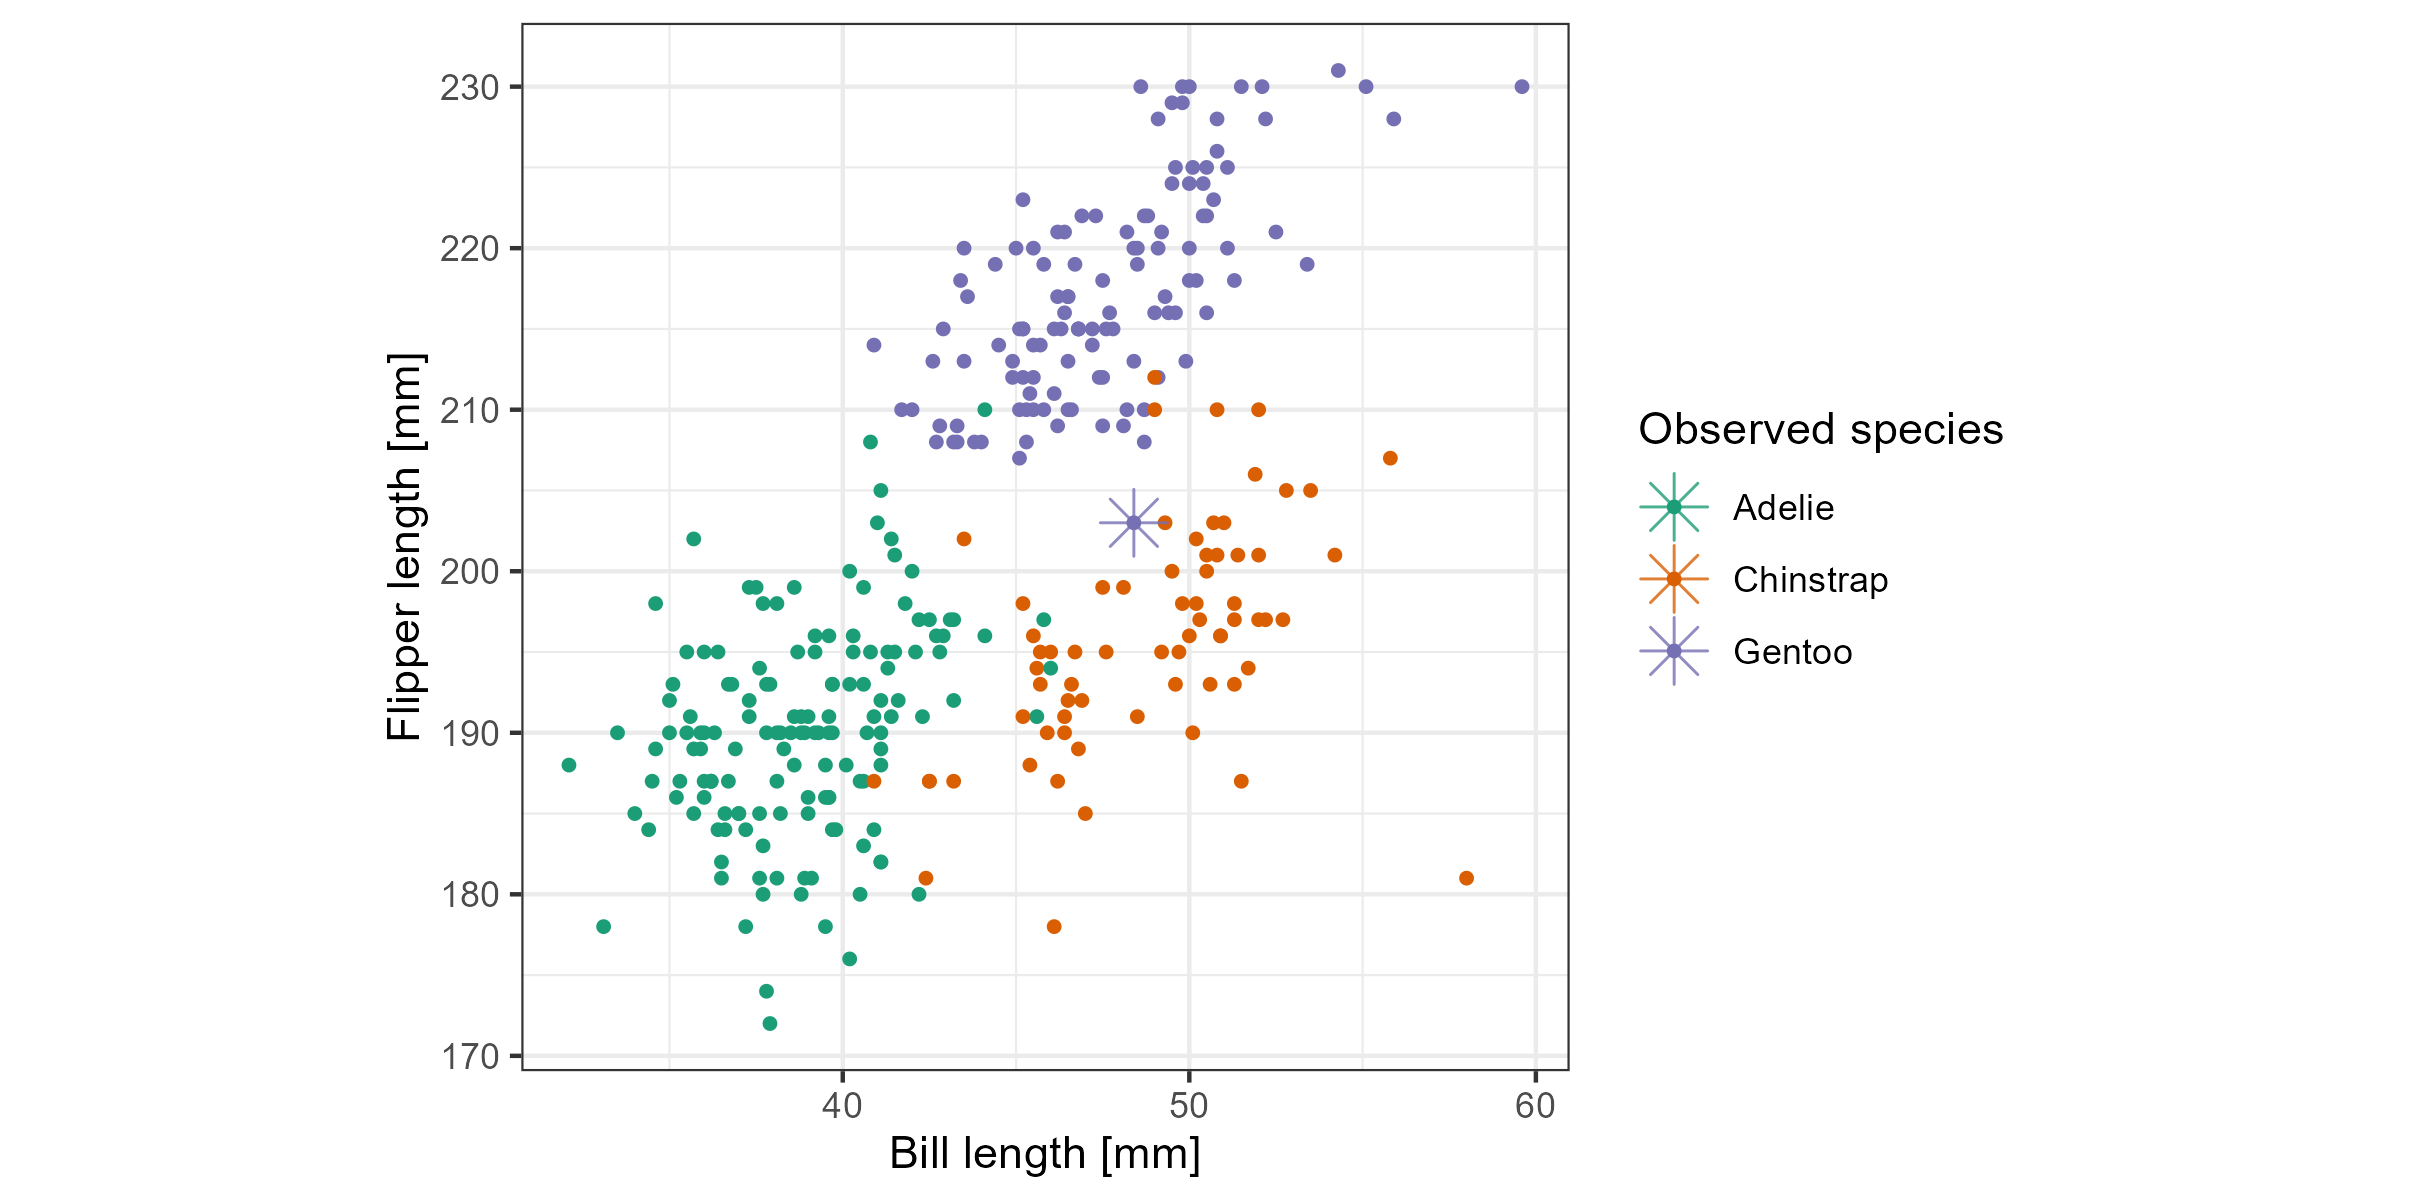 Checking what is learned from the cheem viewer. This is a plot of flipper length (fl) and bill length (bl) with an asterisk highlighting the PO. A Gentoo (purple) penguin was misclassified as a Chinstrap (orange). The PO has an unusually small fl length which is why it is confused with a Chinstrap.